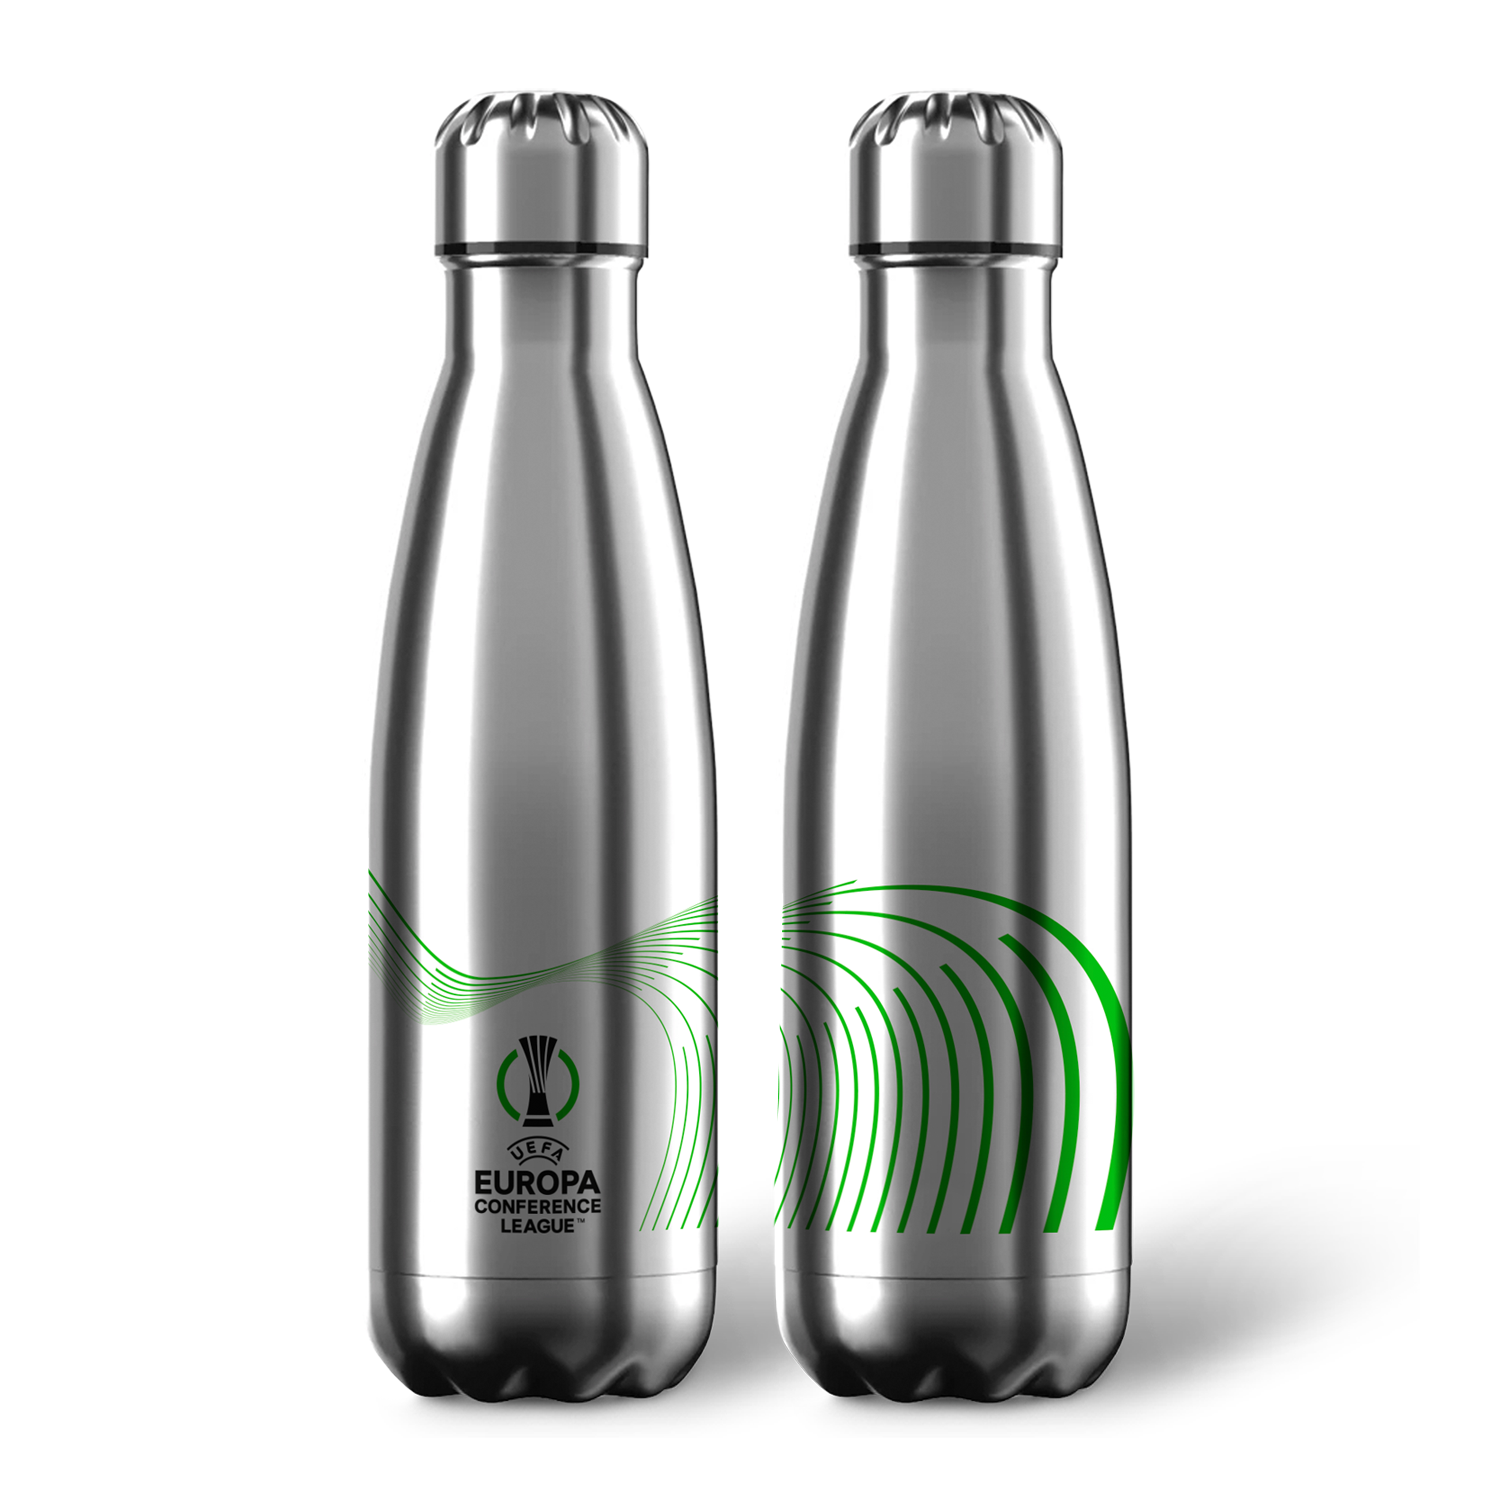 UEFA Europa Conference League Energy Wave Water Bottle UEFA Club Competitions Online Store